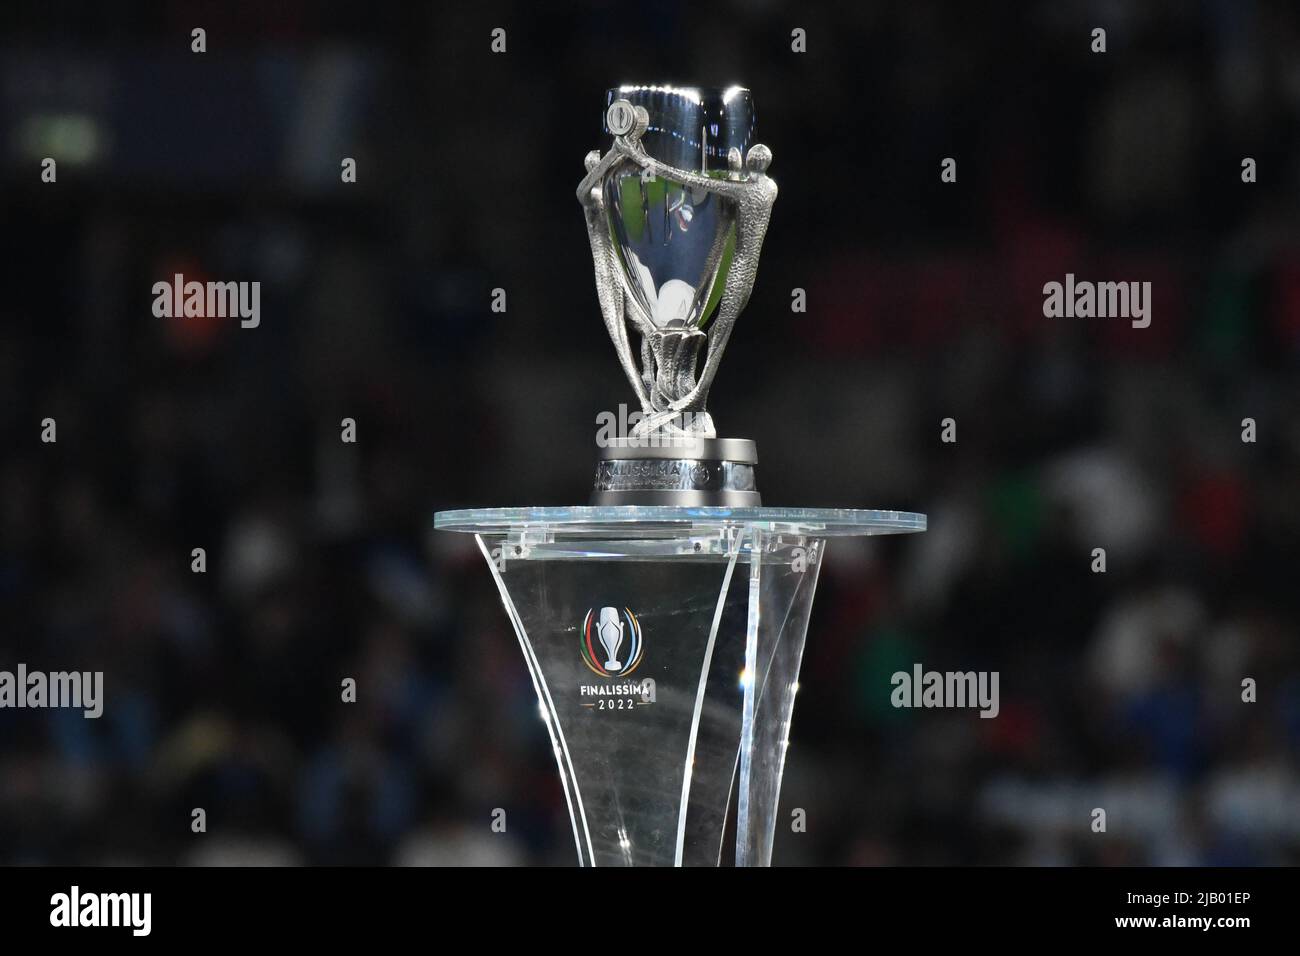 WEMBLEY, ENGLAND - JUNE 1: the Finalissima trophy is seen after the match between Italy and Argentina at Wembley Stadium on June 1, 2022 in Wembley, England. (Photo by Sara Aribó/PxImages) Credit: Px Images/Alamy Live News Stock Photo